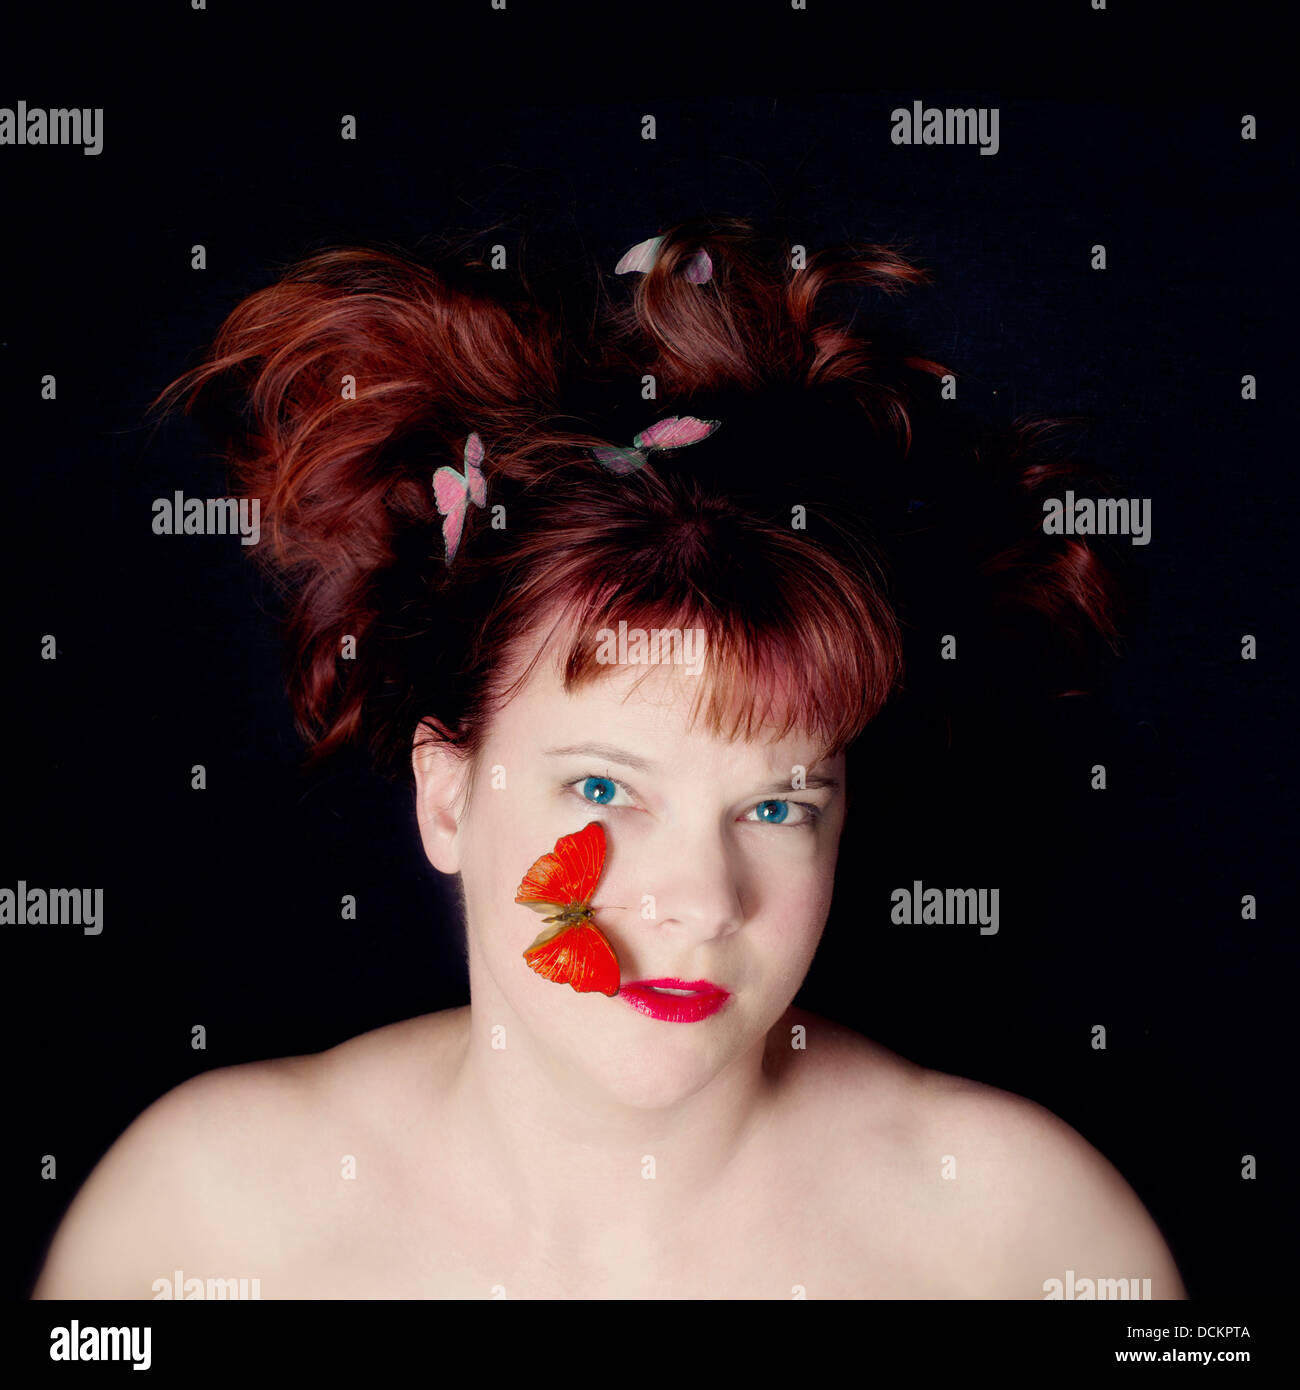 Face and shoulders of redhead with red lips and red butterfly on cheek. Stock Photo